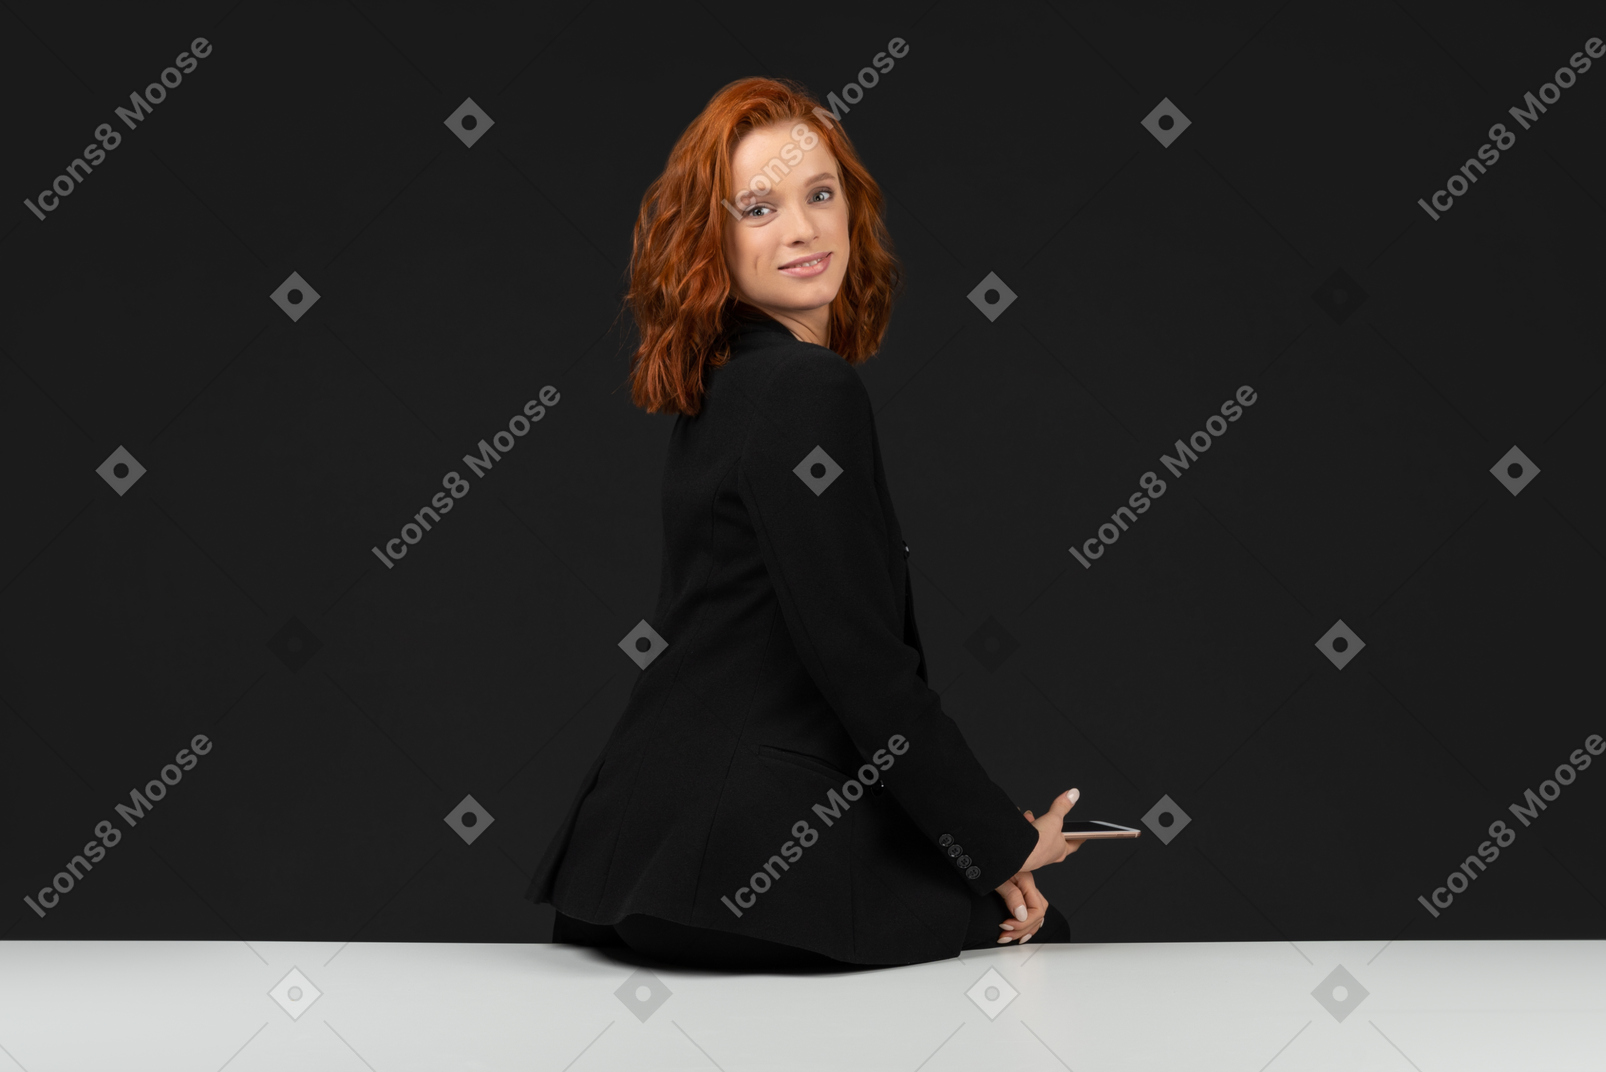 A side view of the young red haired girl holding the phone and looking at the camera